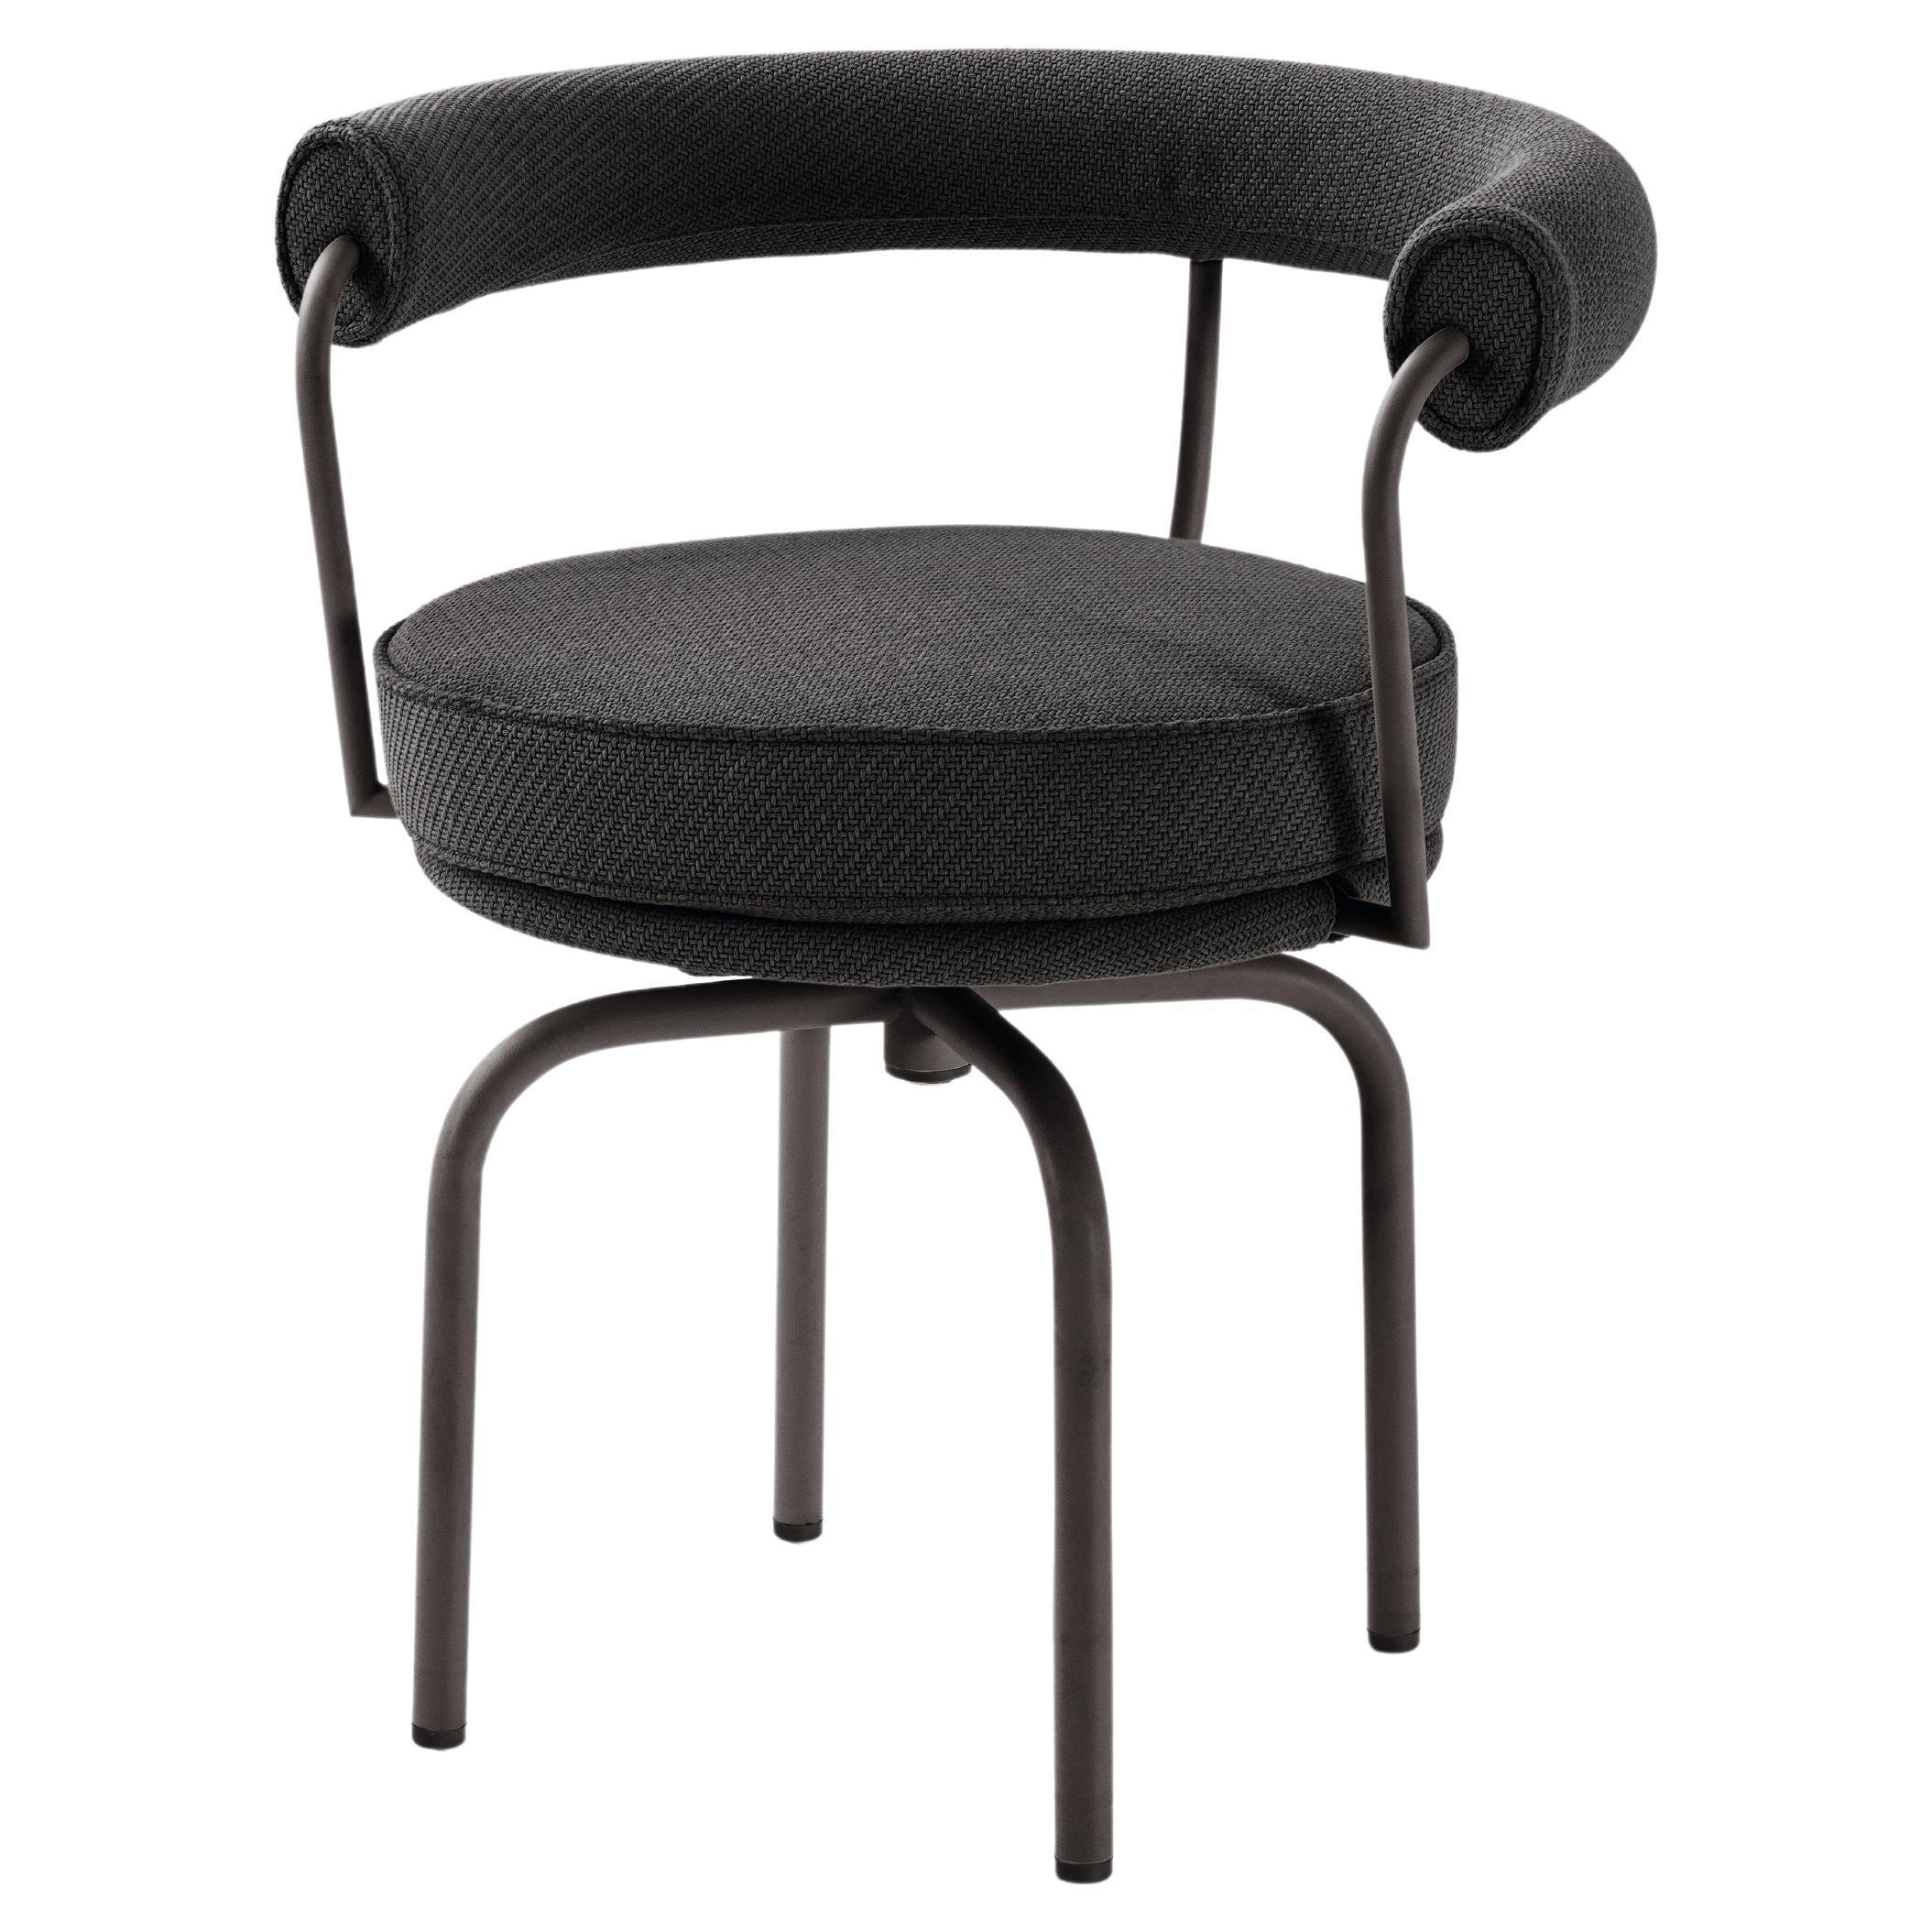 Charlotte Perriand LC7 Outdoors Textured Black Chair by Cassina For Sale